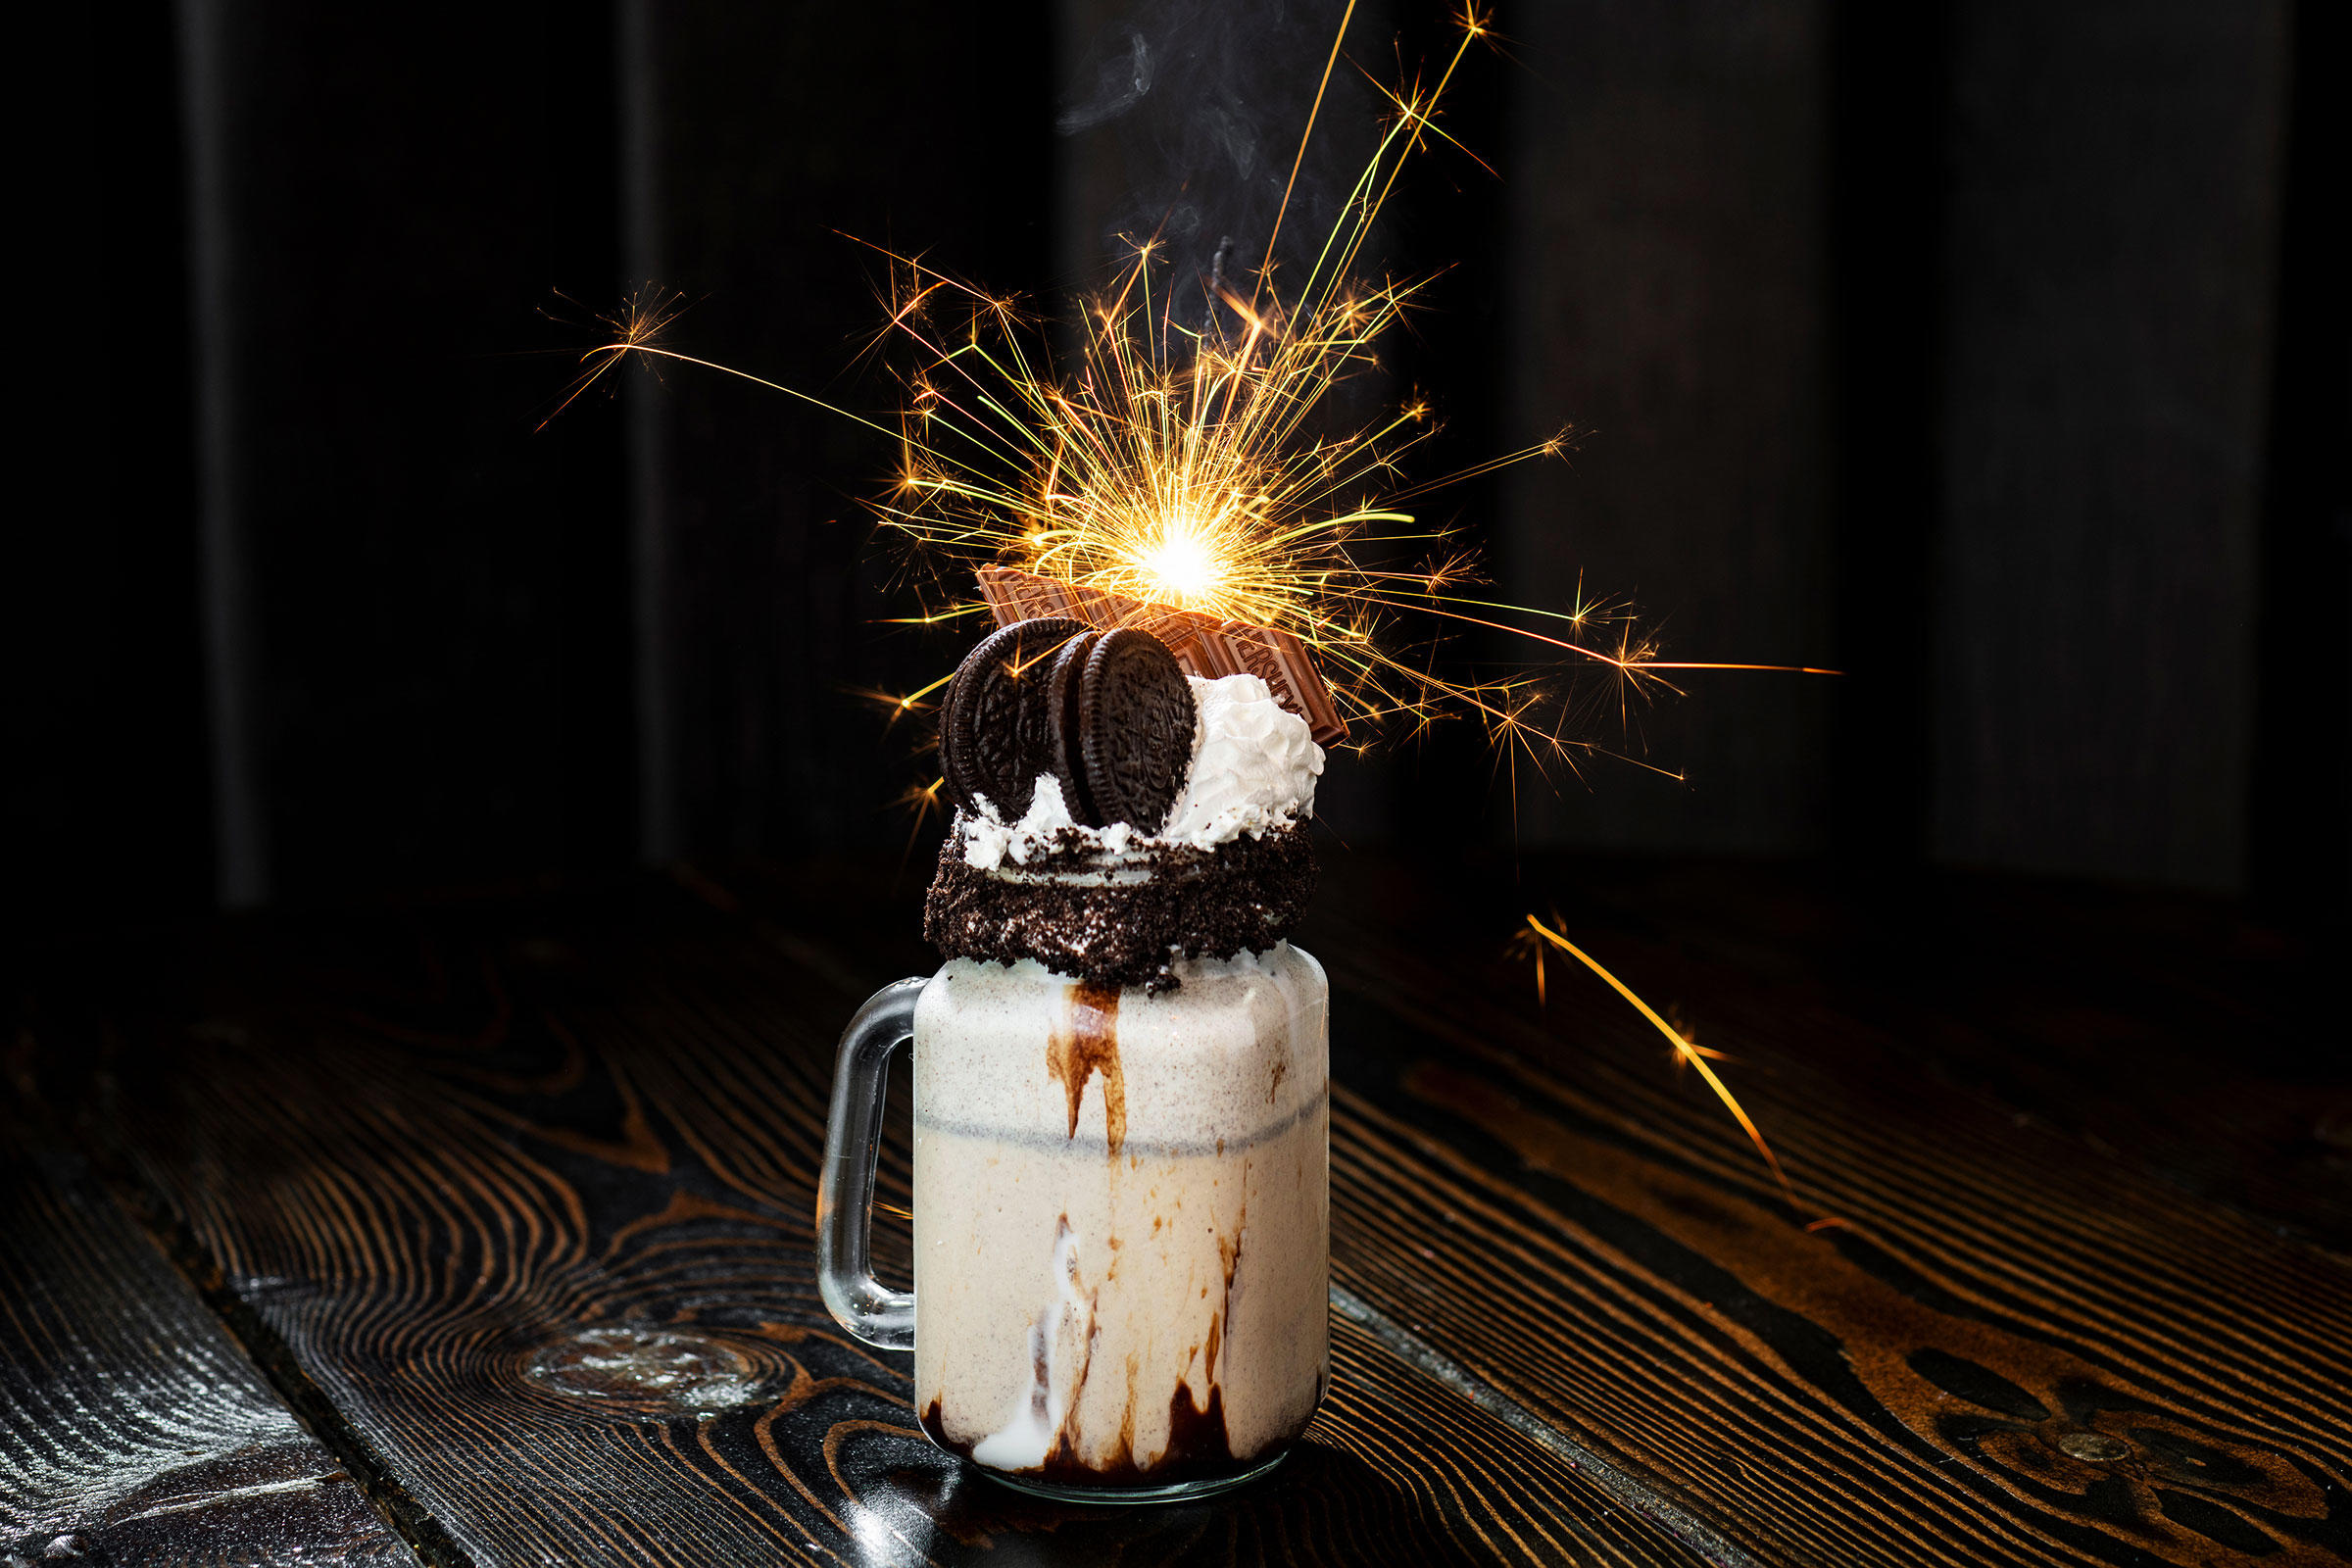 Unique drink photography is just another day in the office for Rob Ballard. Whether your business needs to showcase a typical beverage or a special oreo milkshake with a sparkling surprise, Rob Ballard Photography has you covered!